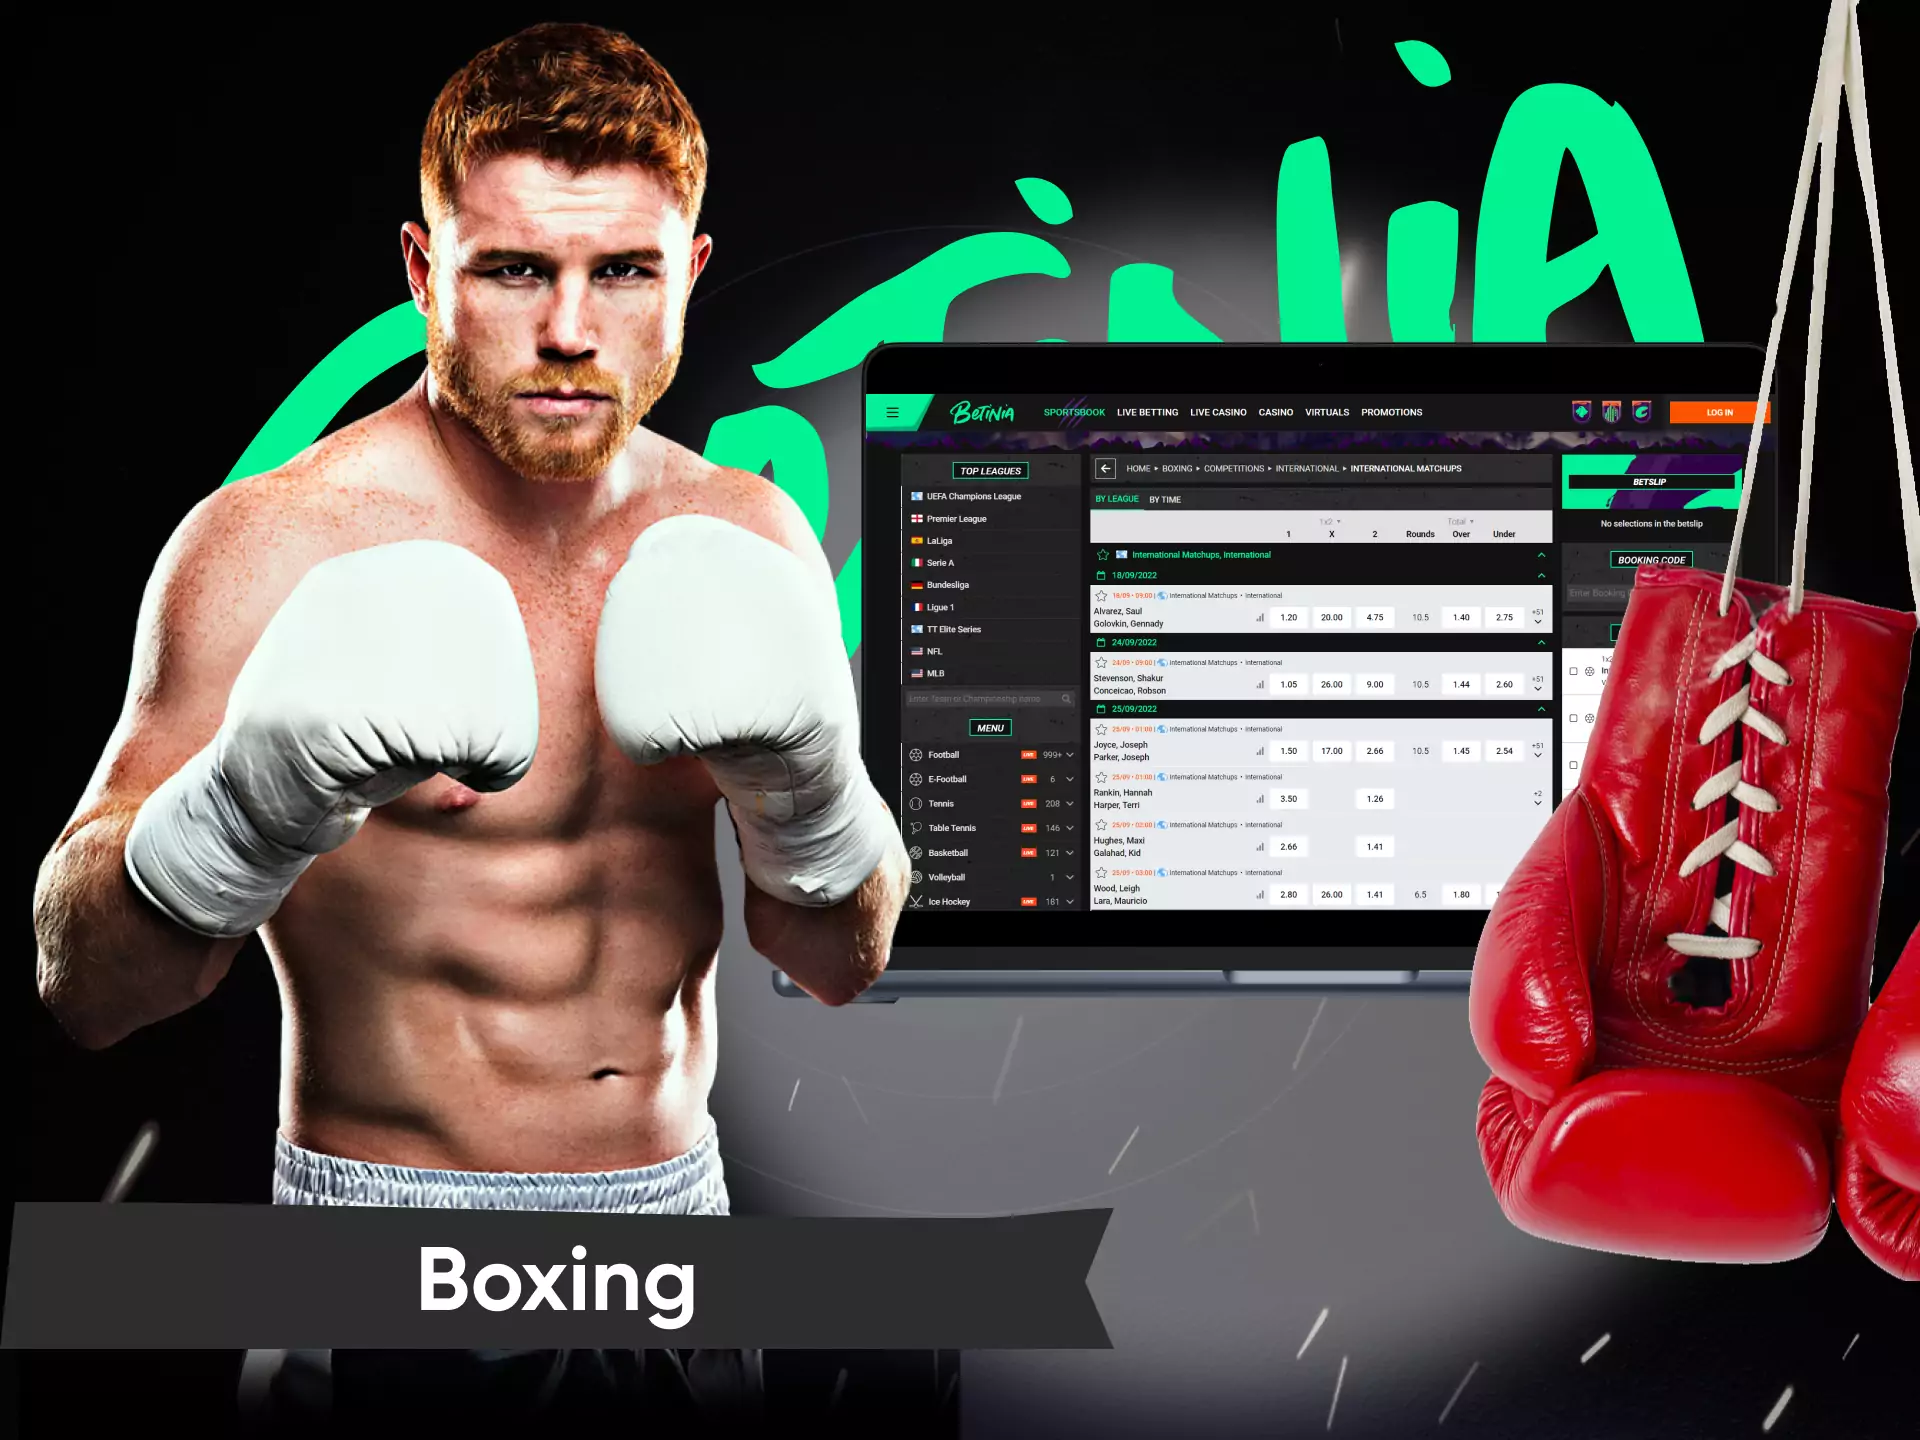 Betting on boxing fights attract fans among users of Betinia.